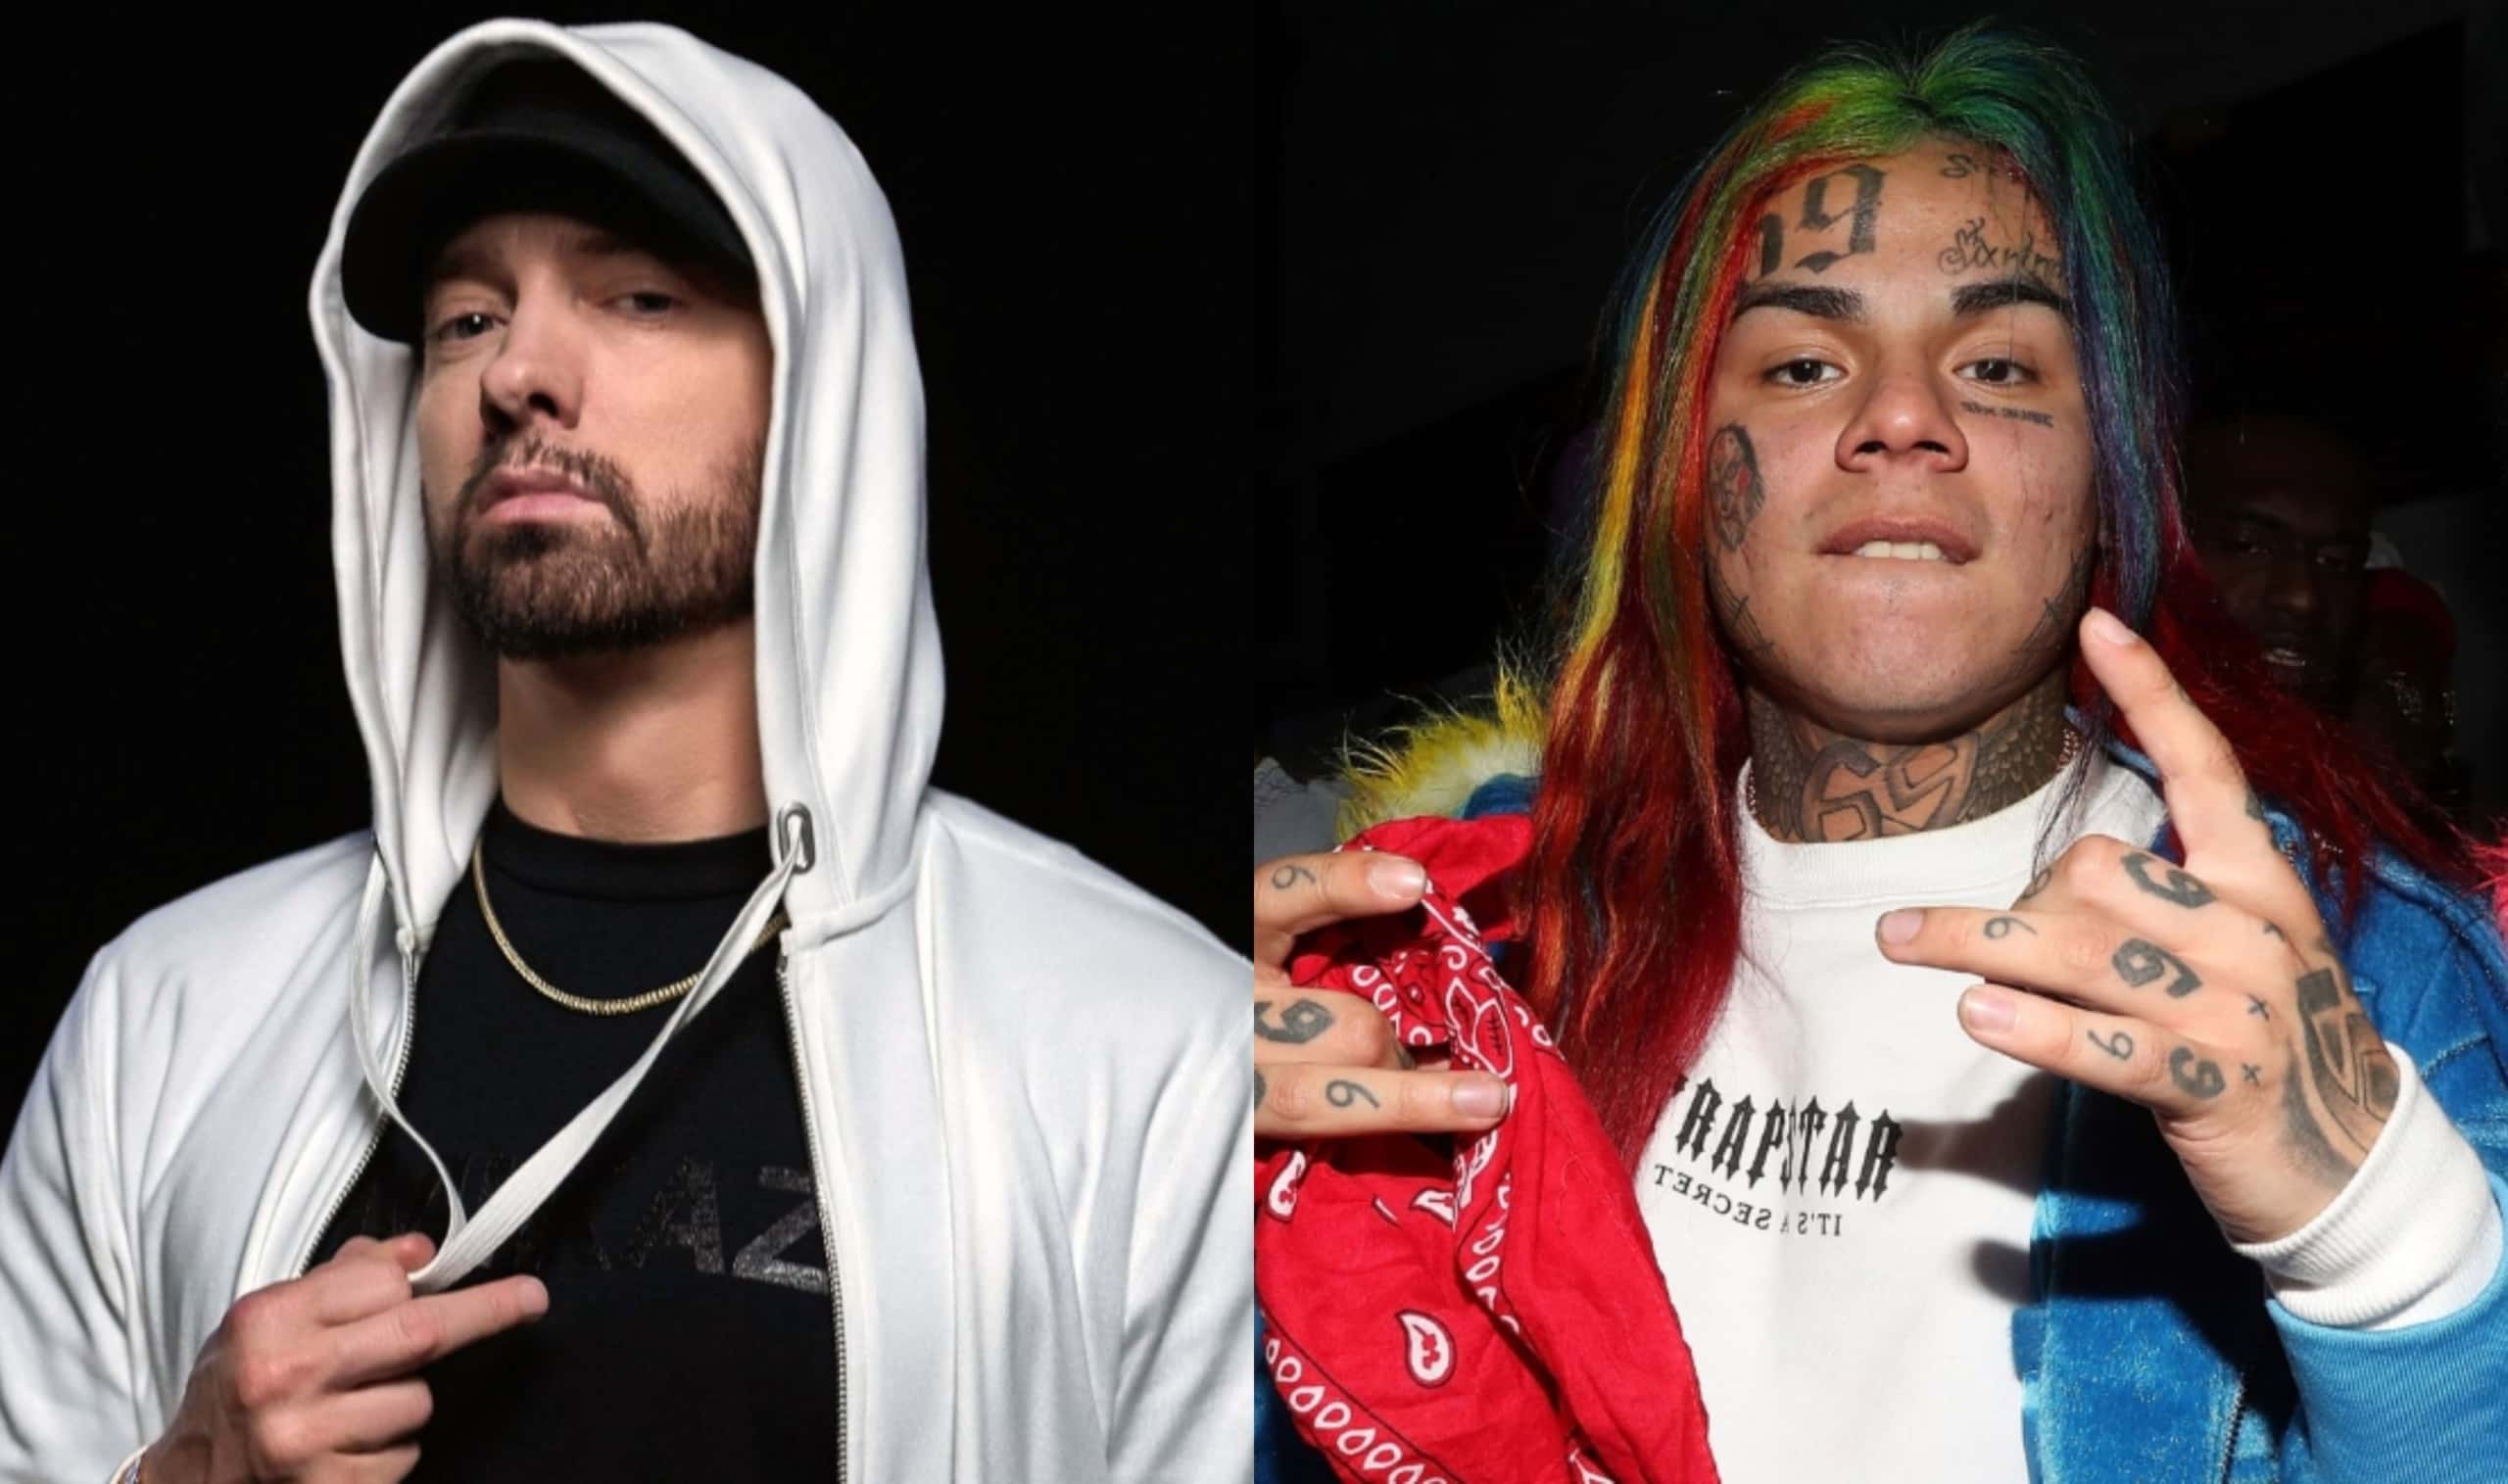 Tekashi 6ix9ine Breaks Eminem's Record of Most Watched Hip-Hop Video in First 24 Hours